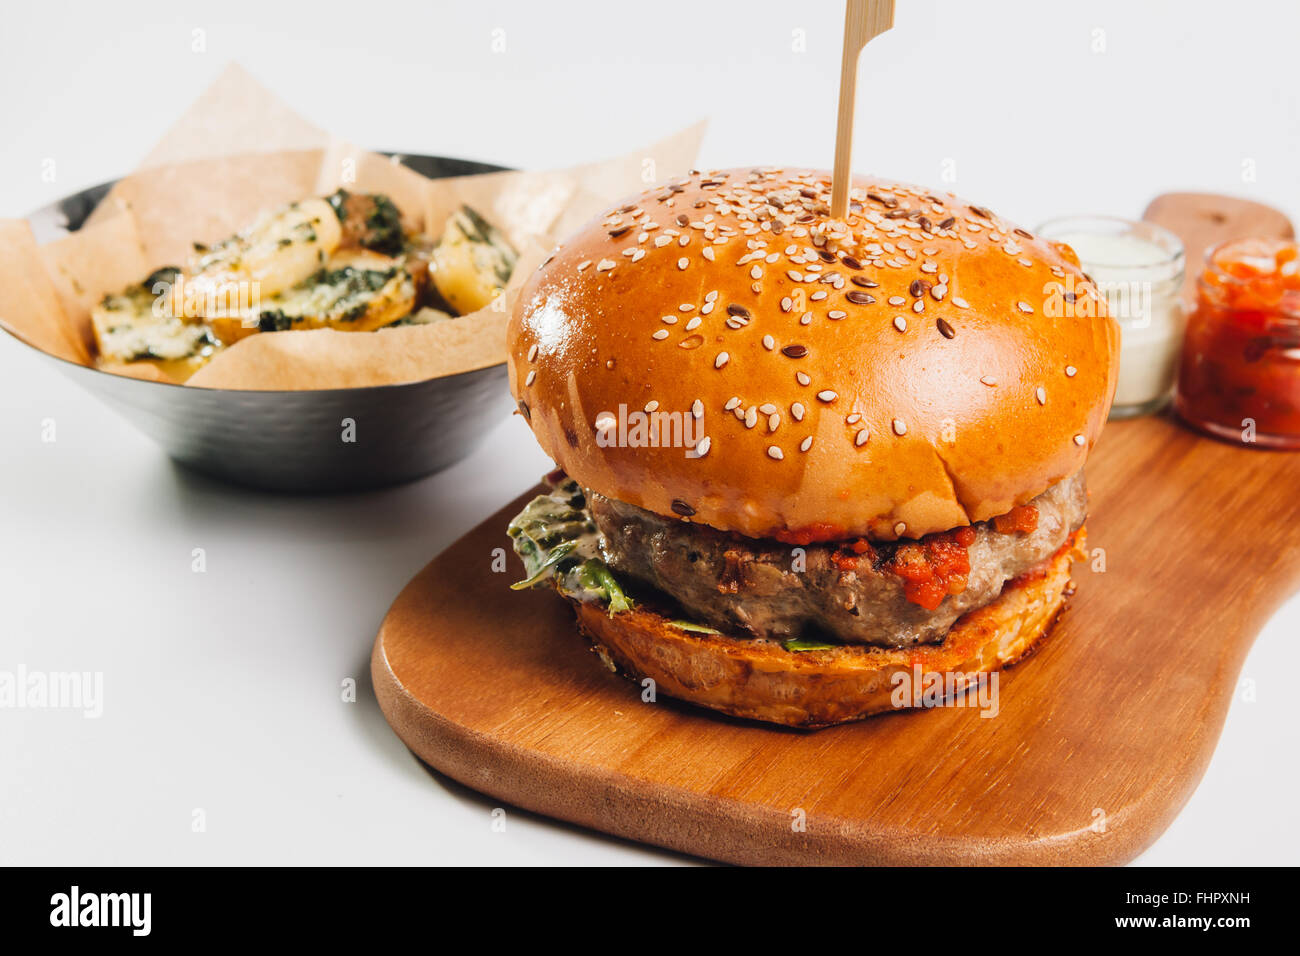 Burger With Fries On Wooden Plate Stock Photo Alamy